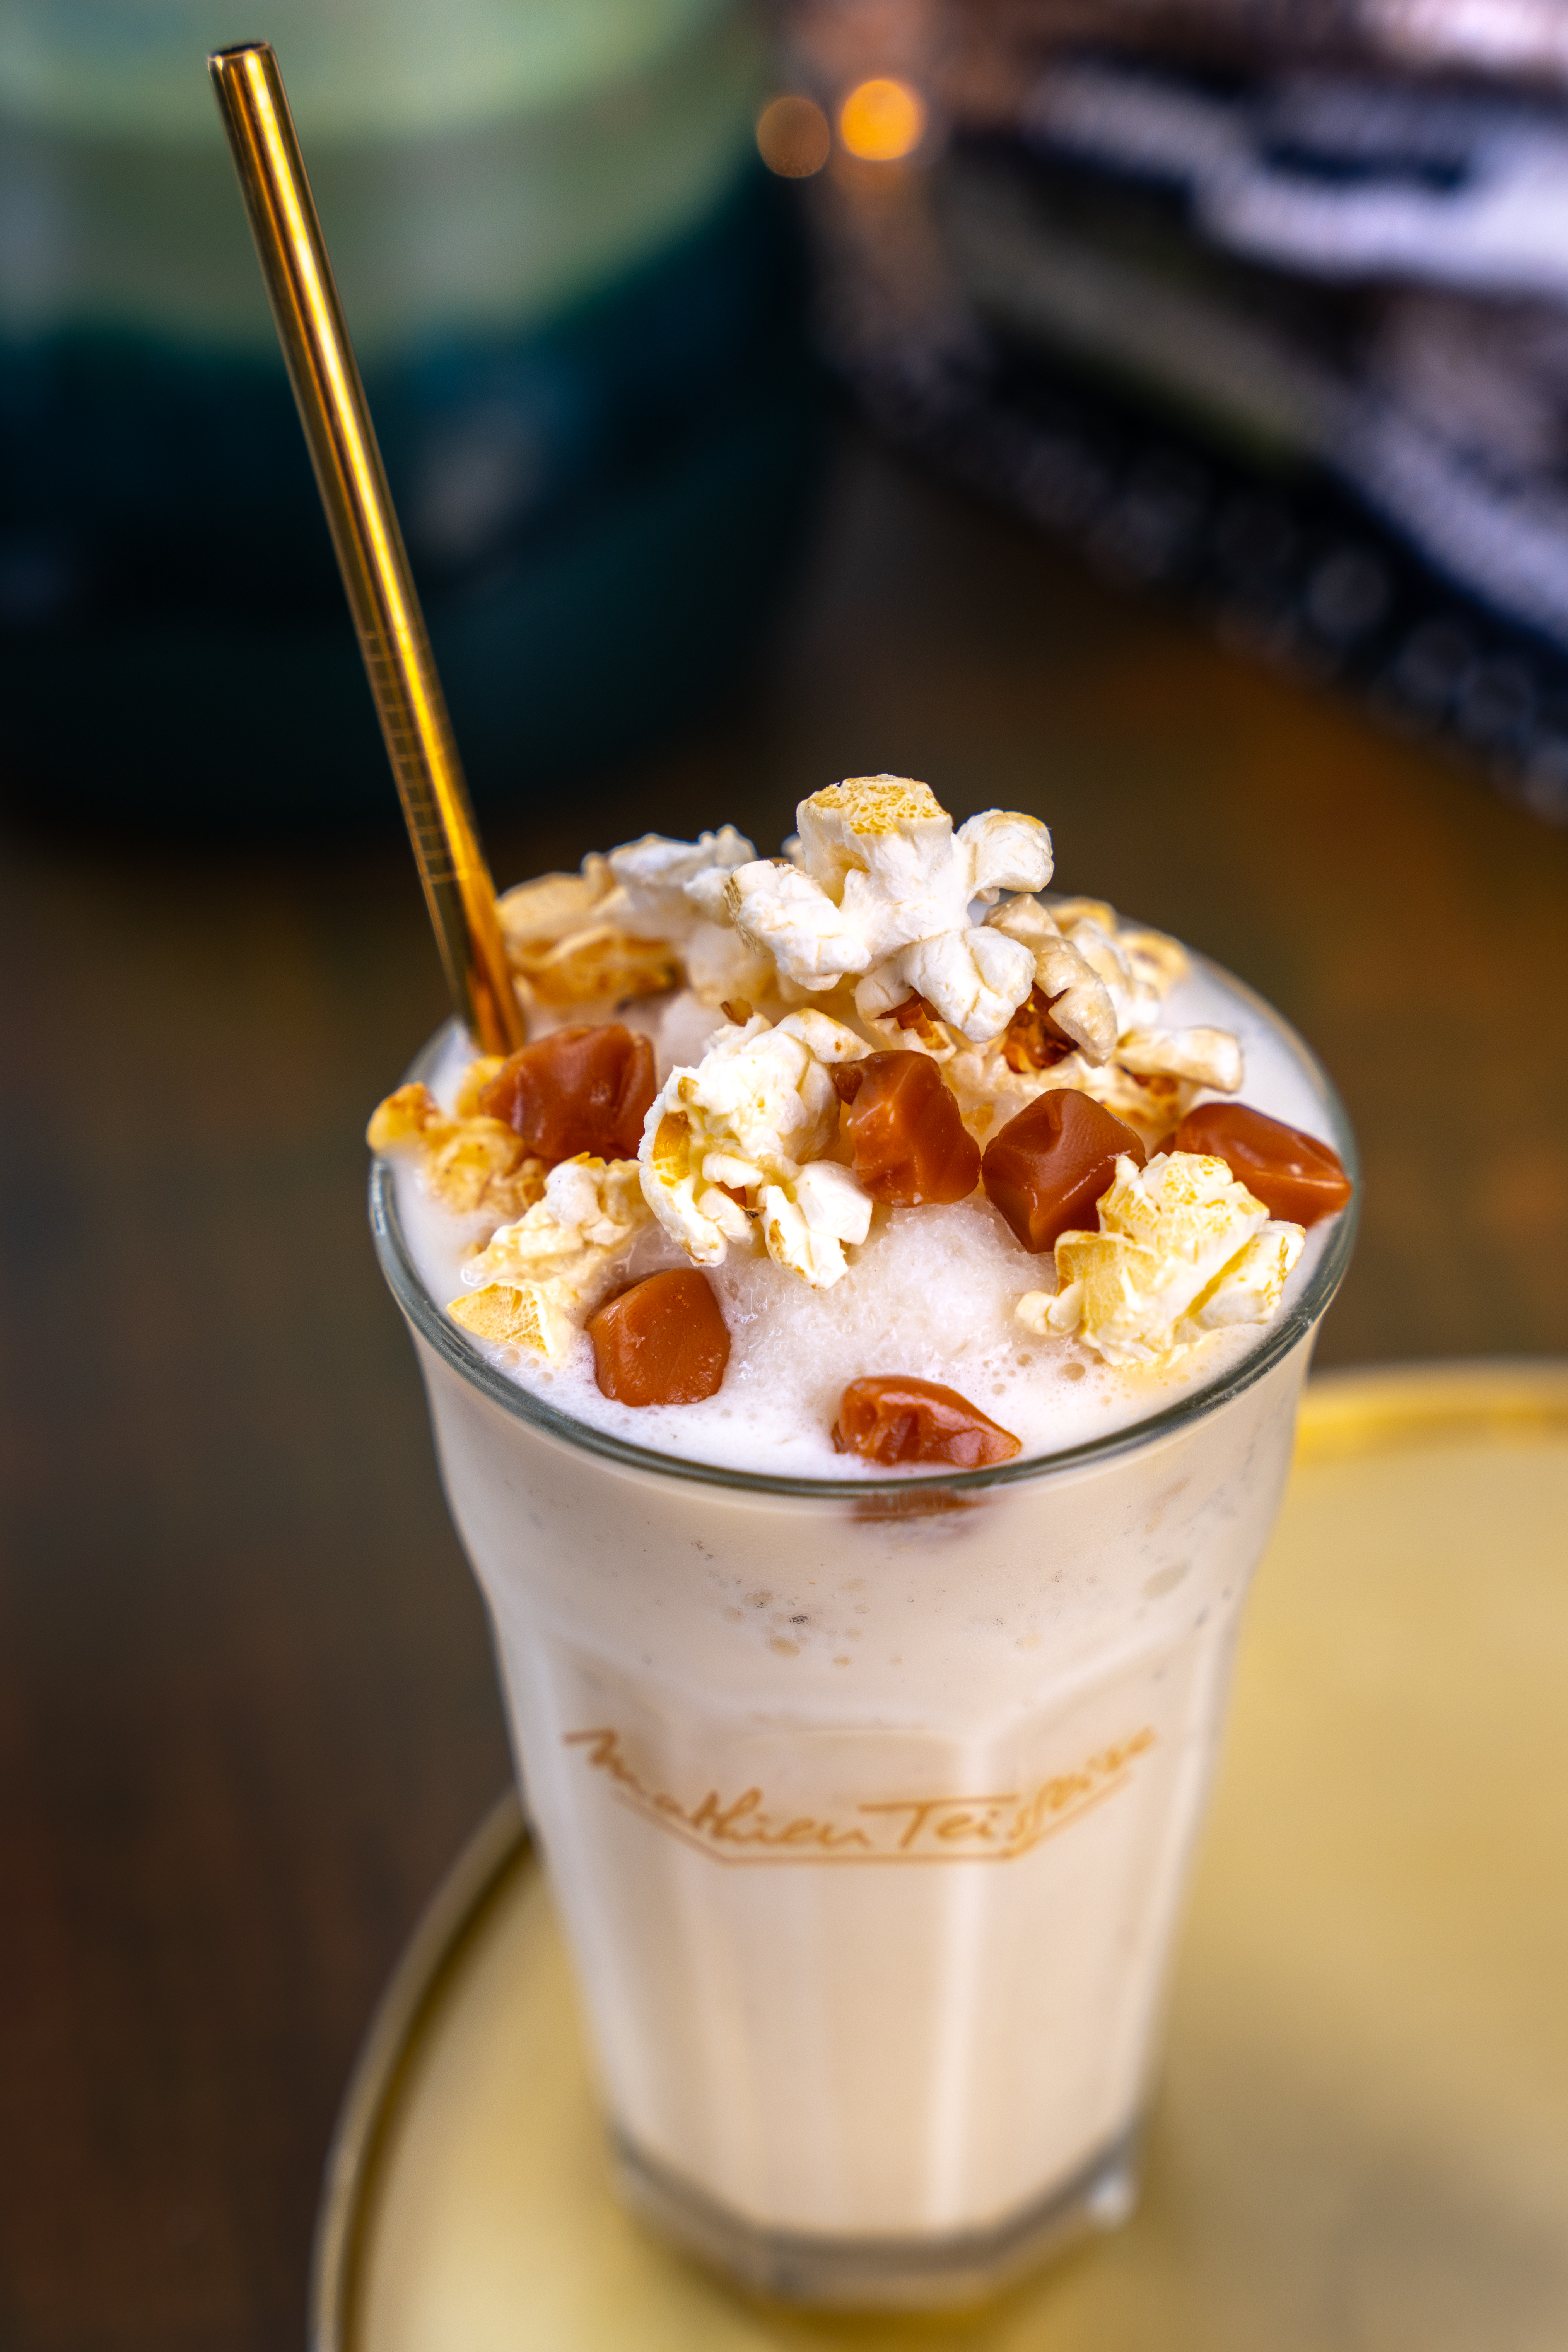 On the edge of a gold tray there is a Mathieu Teisseire glass, containing a white coloured milkshake. The milkshake is topped with cream, popcorn and chunks of caramel.